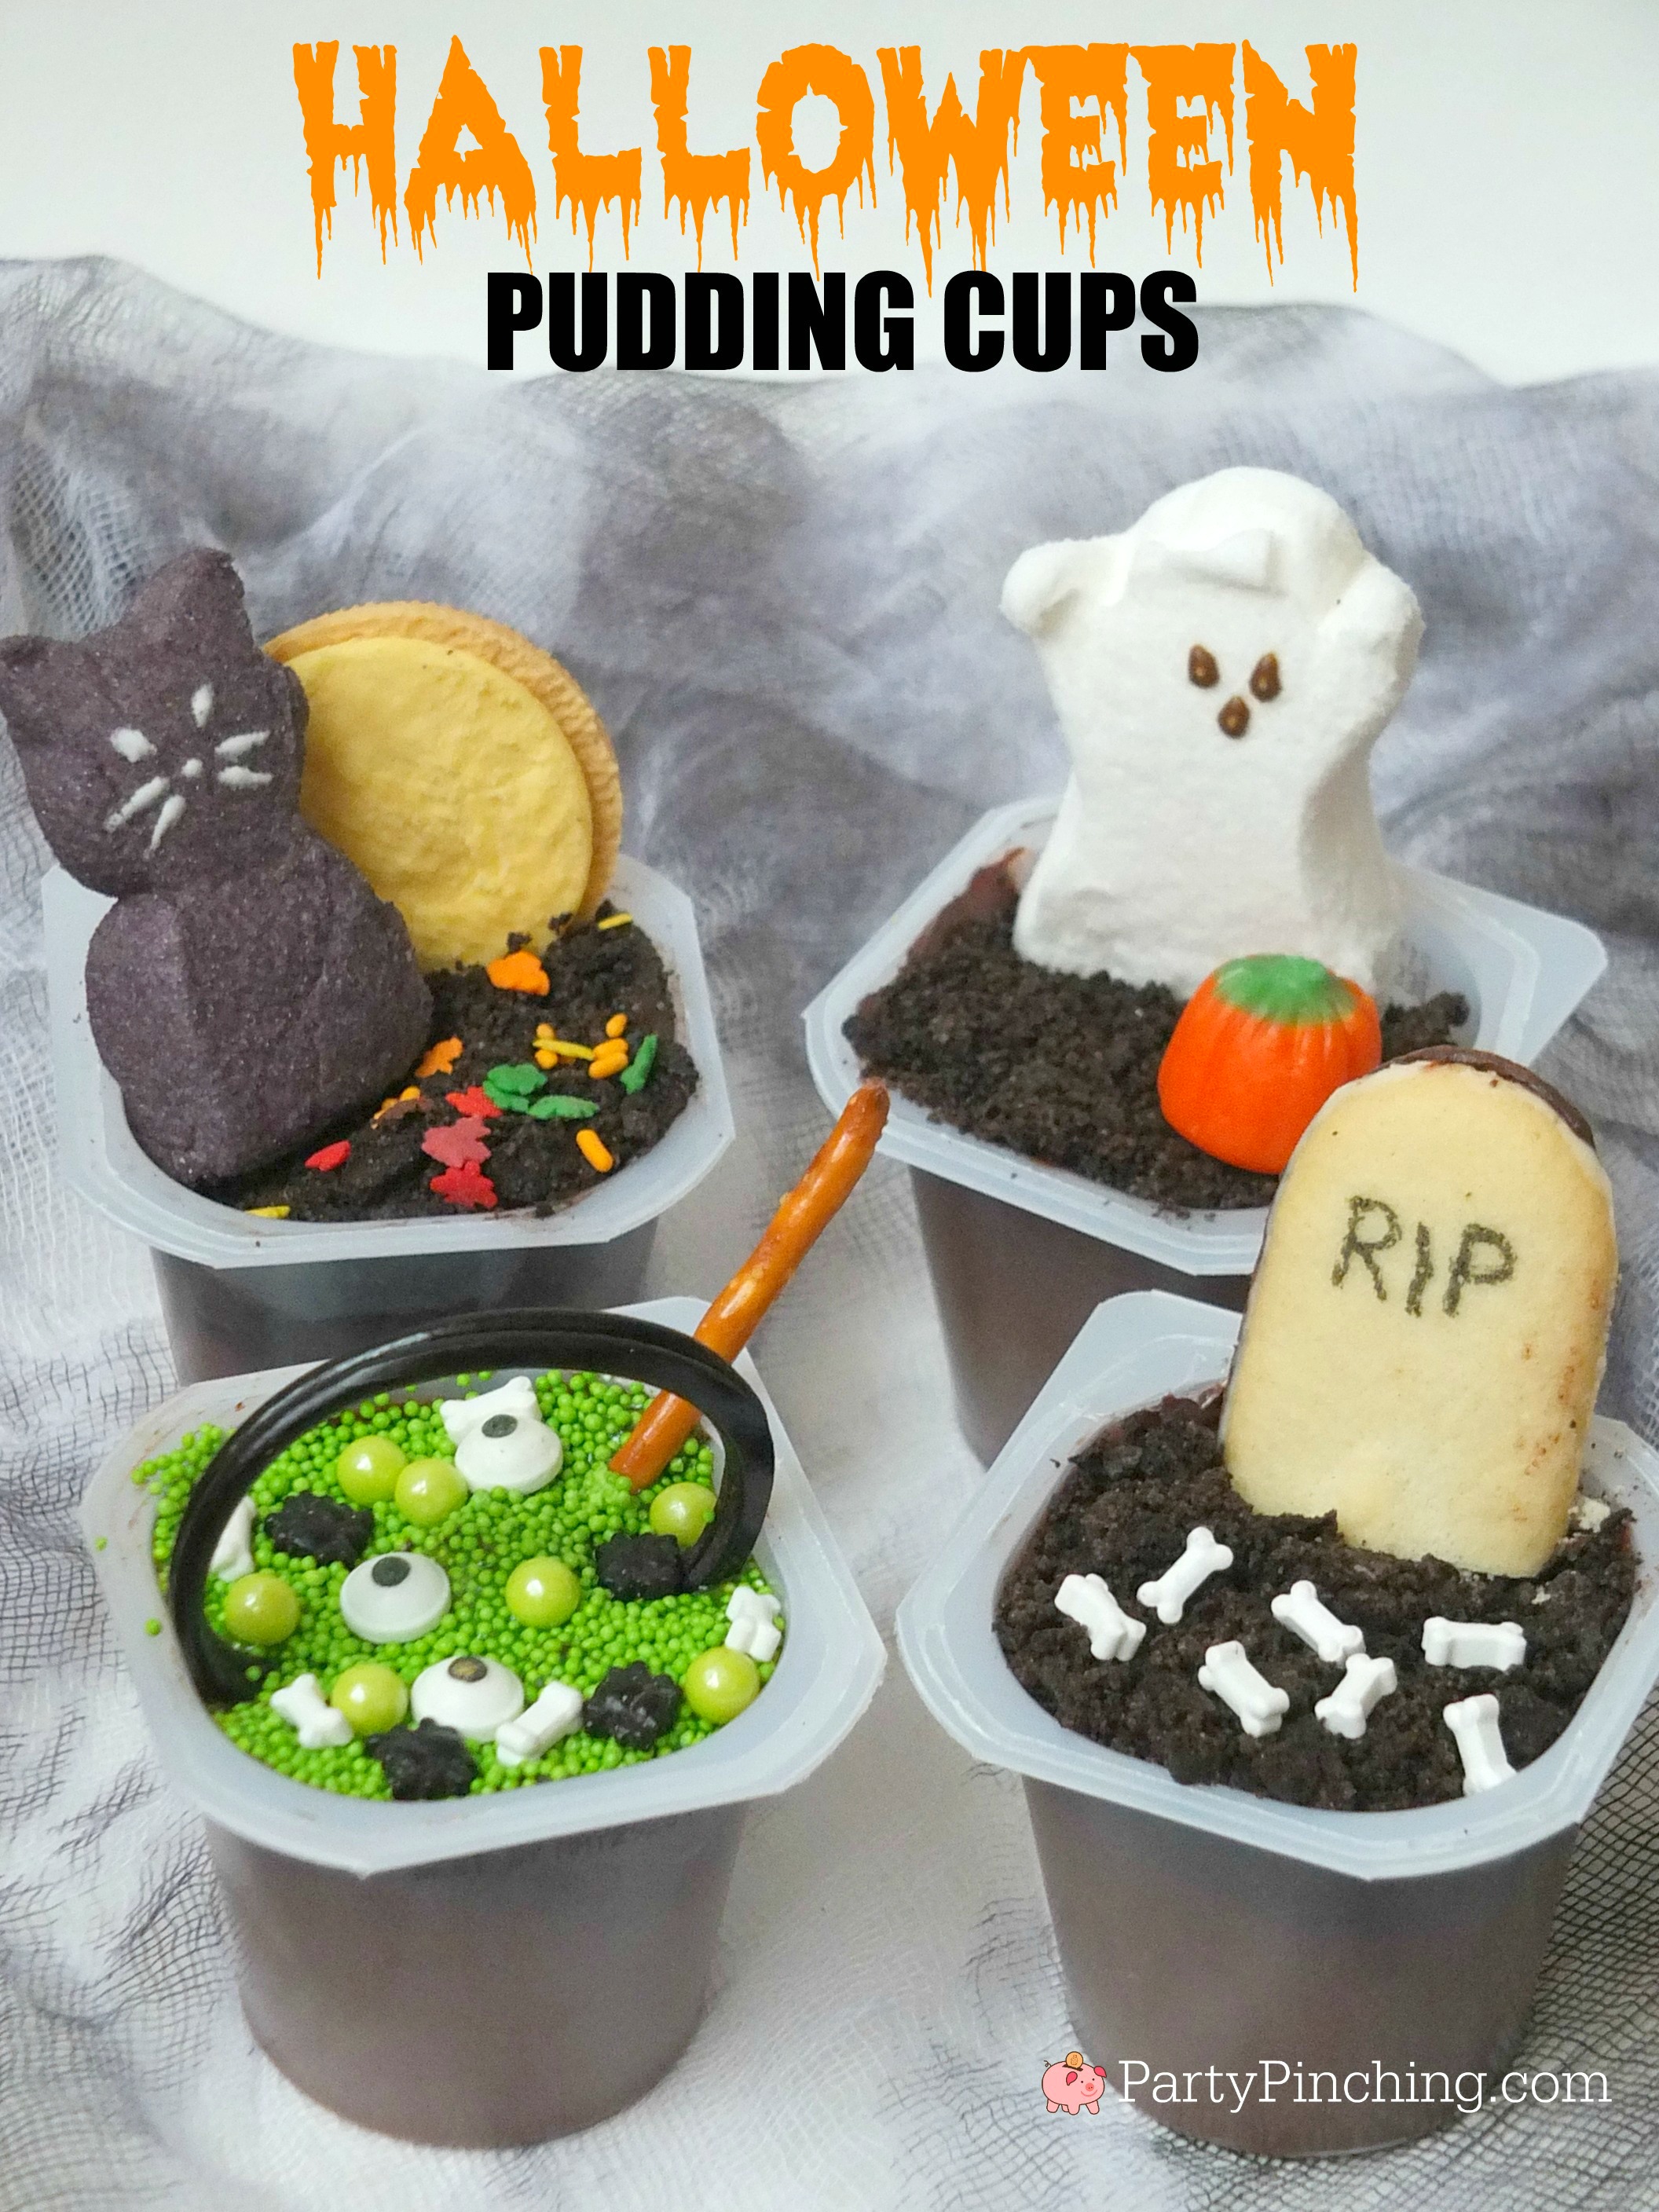 Halloween Pudding cups, easy to make Halloween treats for kids, dessert ideas for Halloween, cute food, fun food for kids, sweet treats, ghost PEEPS, cat PEEPS, tombstone cookies, witch's brew pudding, ghost pudding cups, graveyard pudding cups